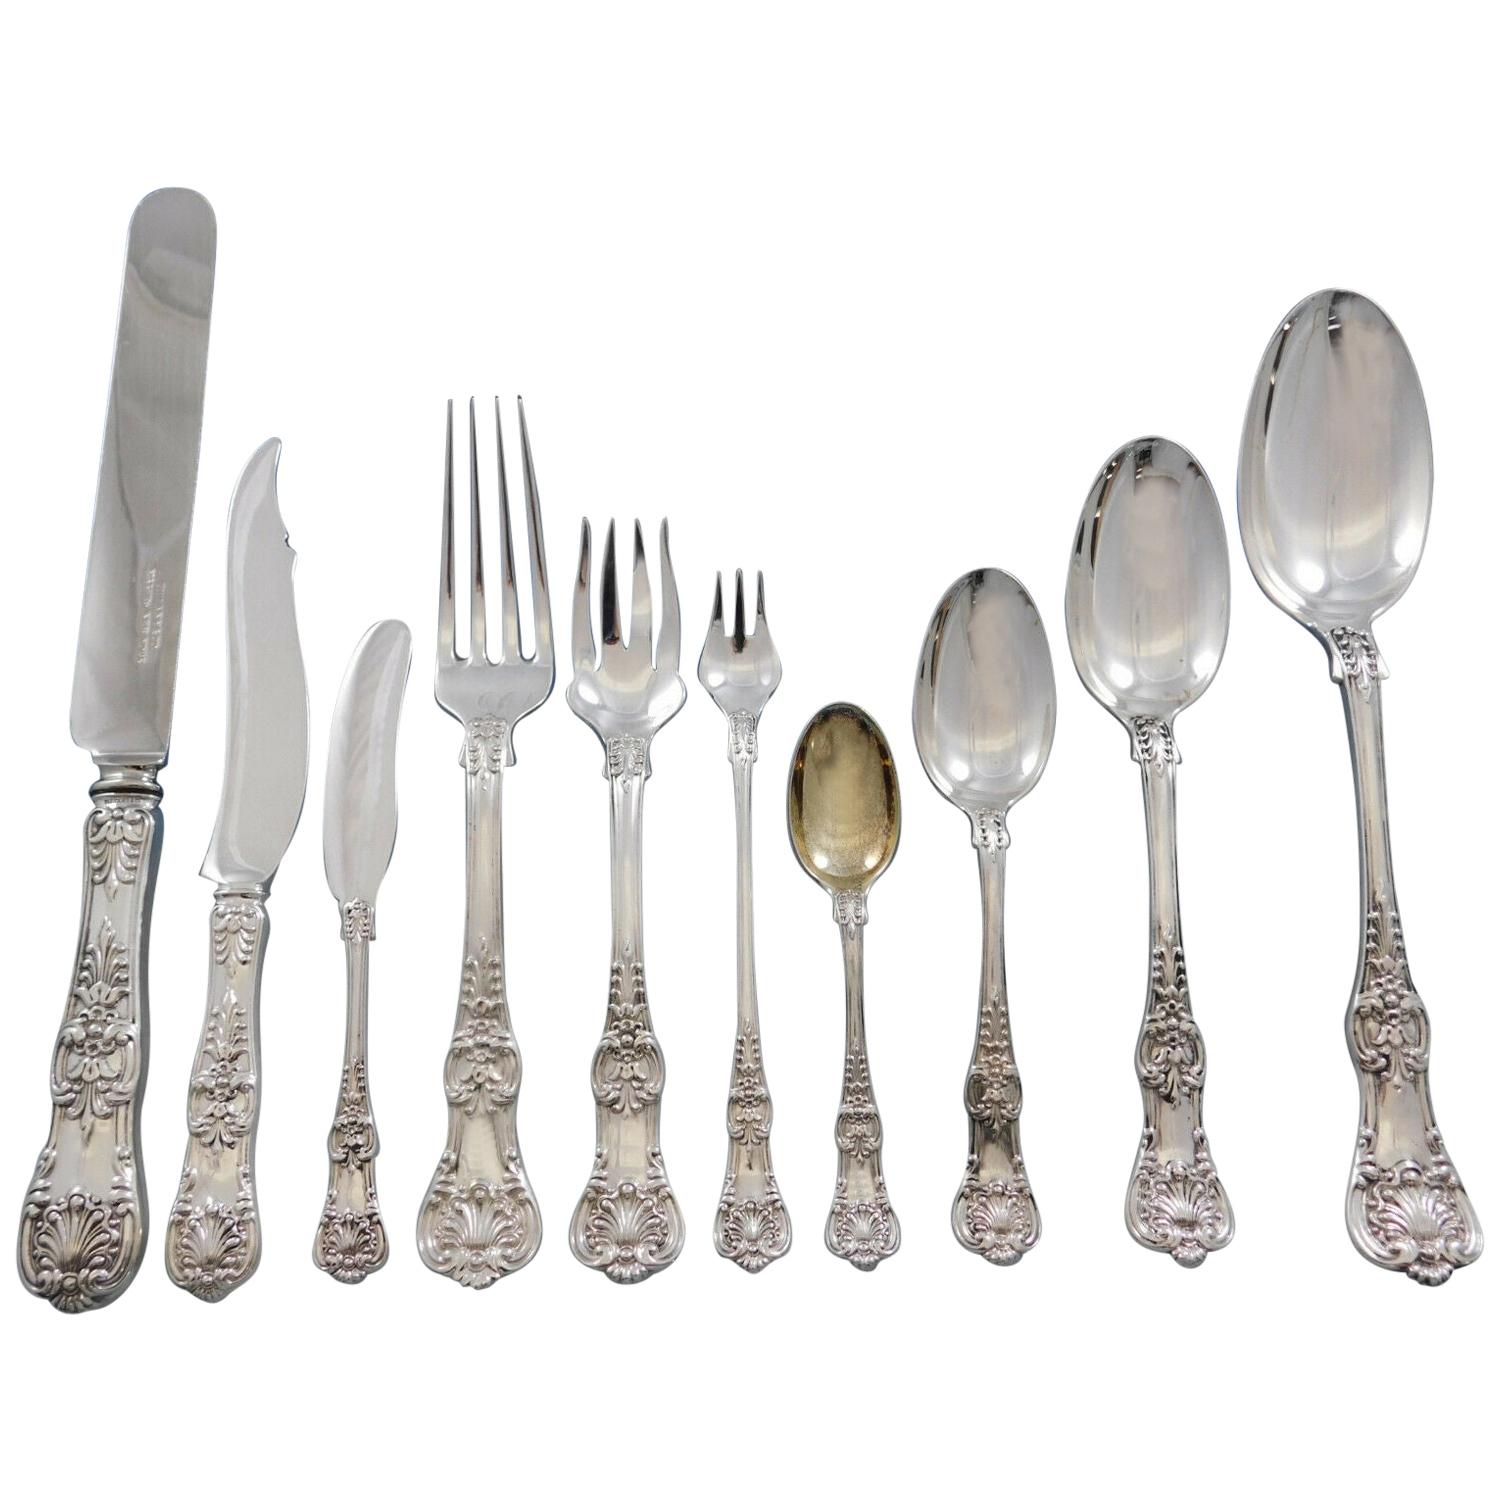 English King by Tiffany Sterling Silver Flatware Set for 8 Service 127 Pc Dinner